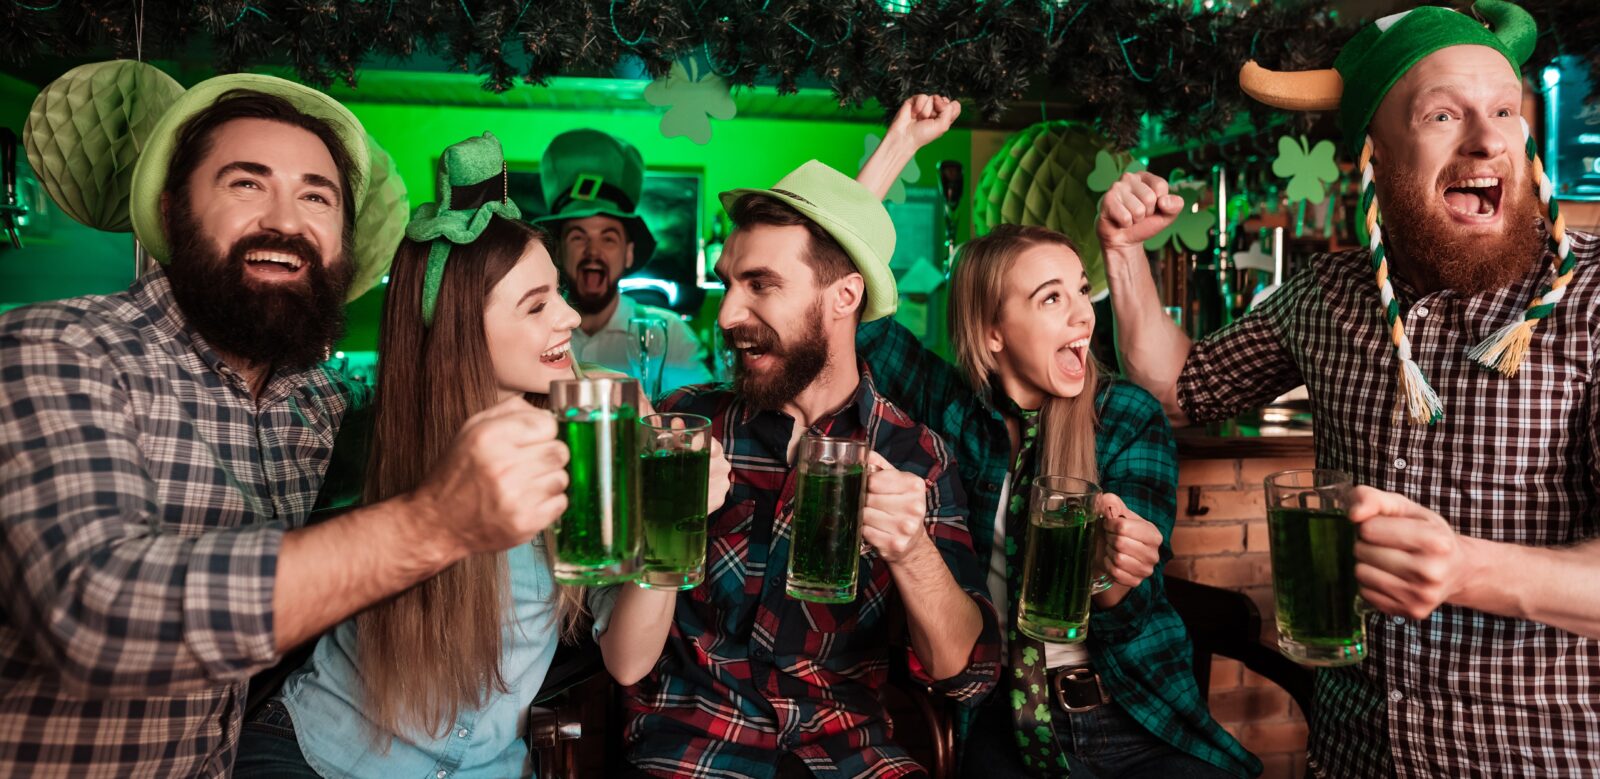 Do The Almost St. Patty’s Day Pub Crawl in Bakersfield!